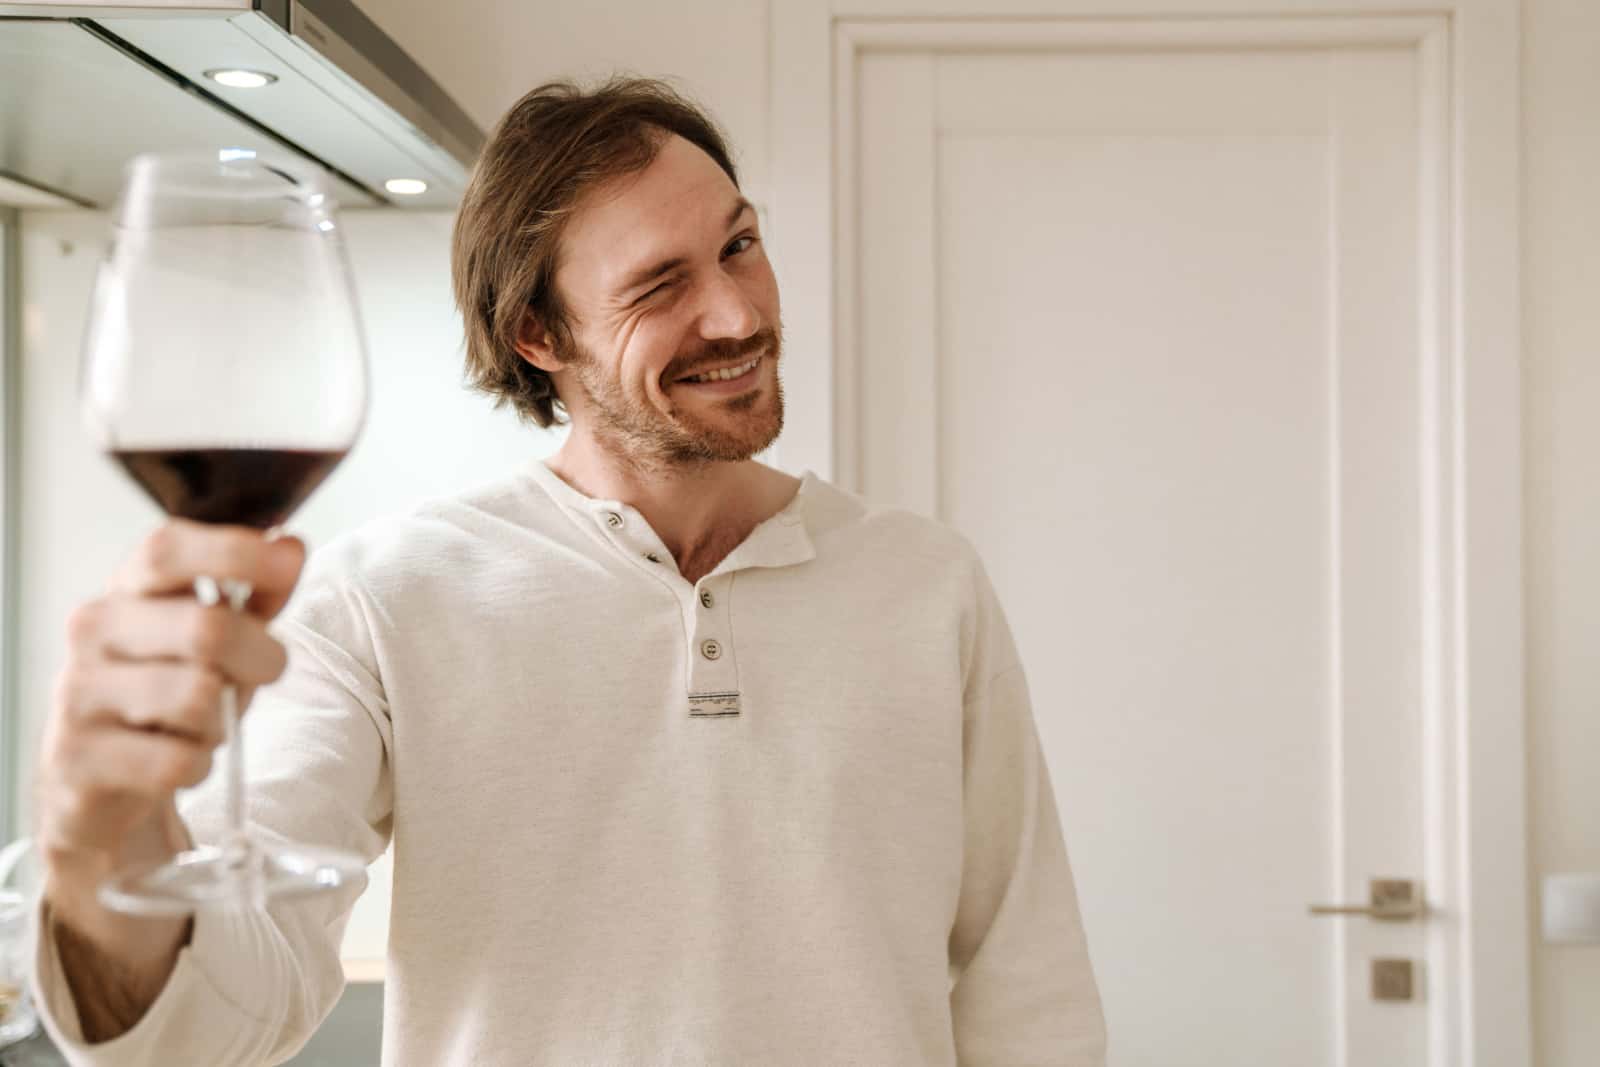 man smiling and winking while drinking wine in kitchen at home